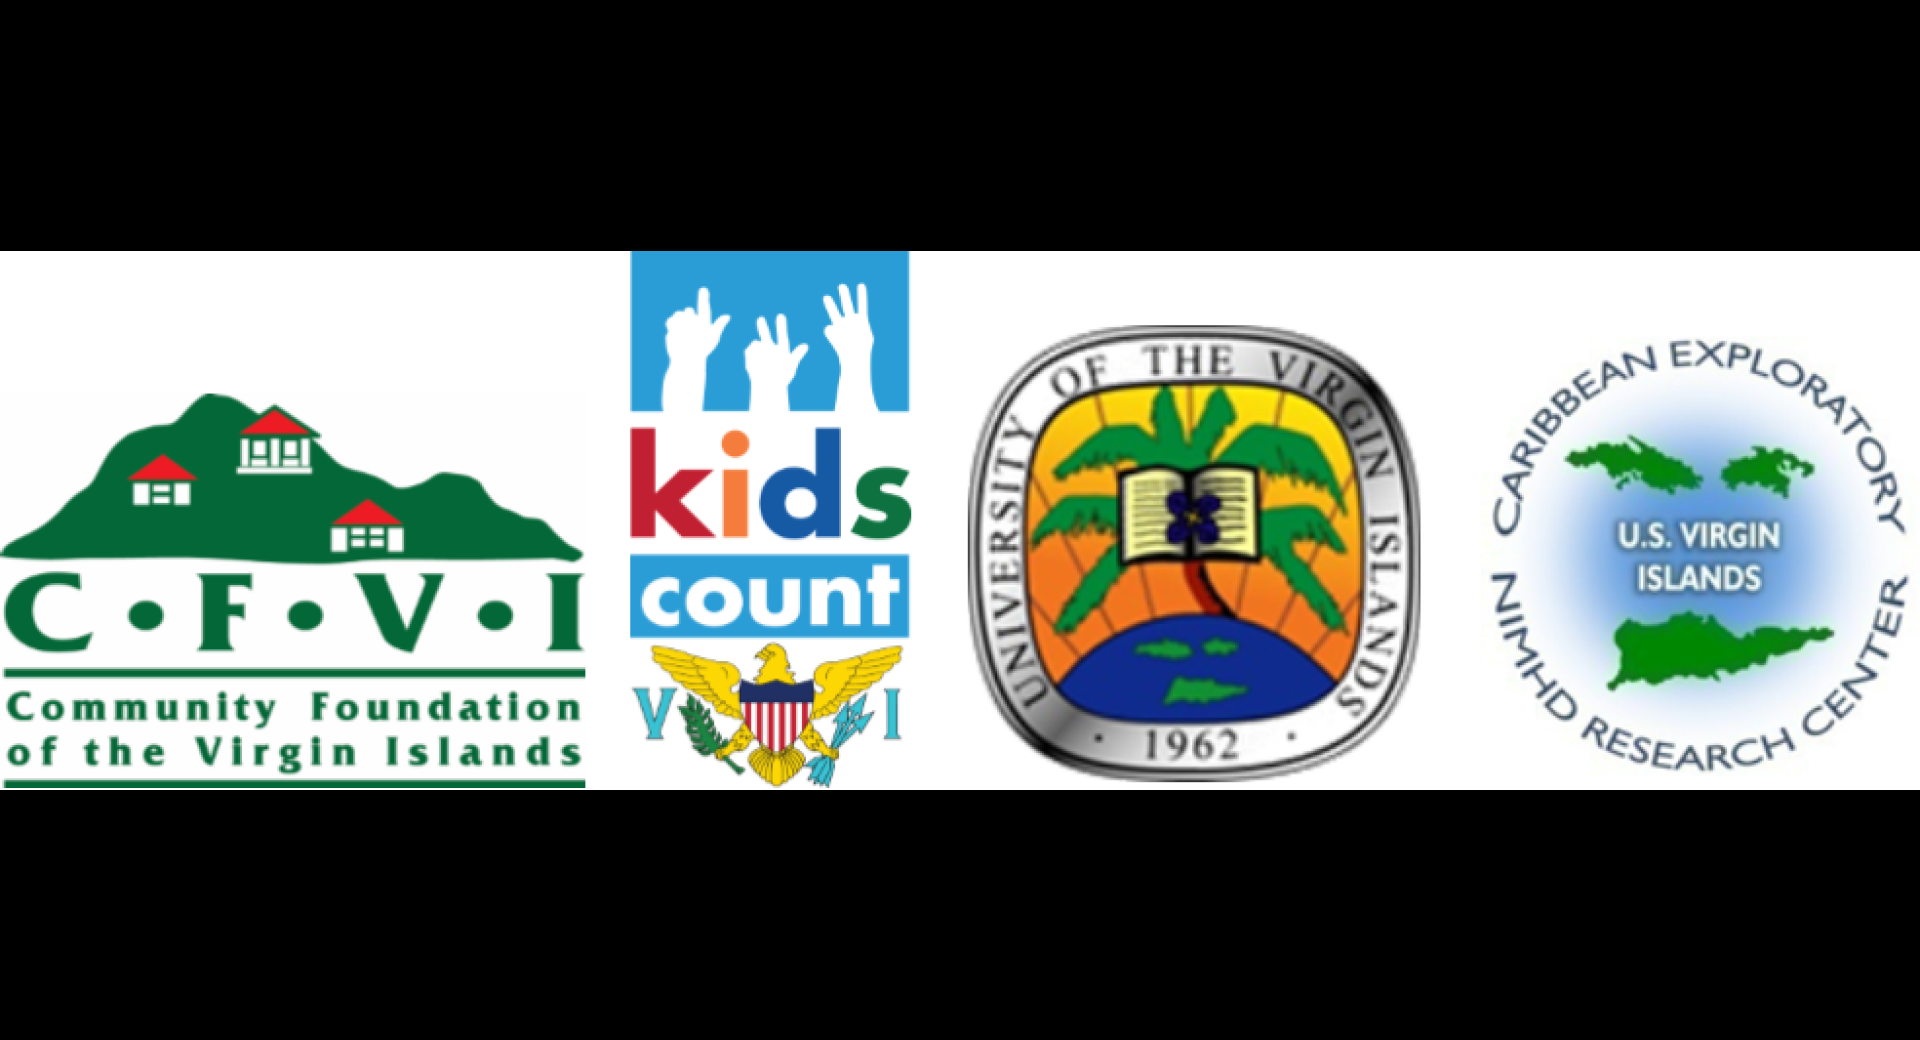 Community Foundation of the Virgin Islands and the University of the Virgin Islands Caribbean Exploratory Research Center Release Post-Hurricane Assessment of Impacts on Vulnerable Children and Families in the USVI